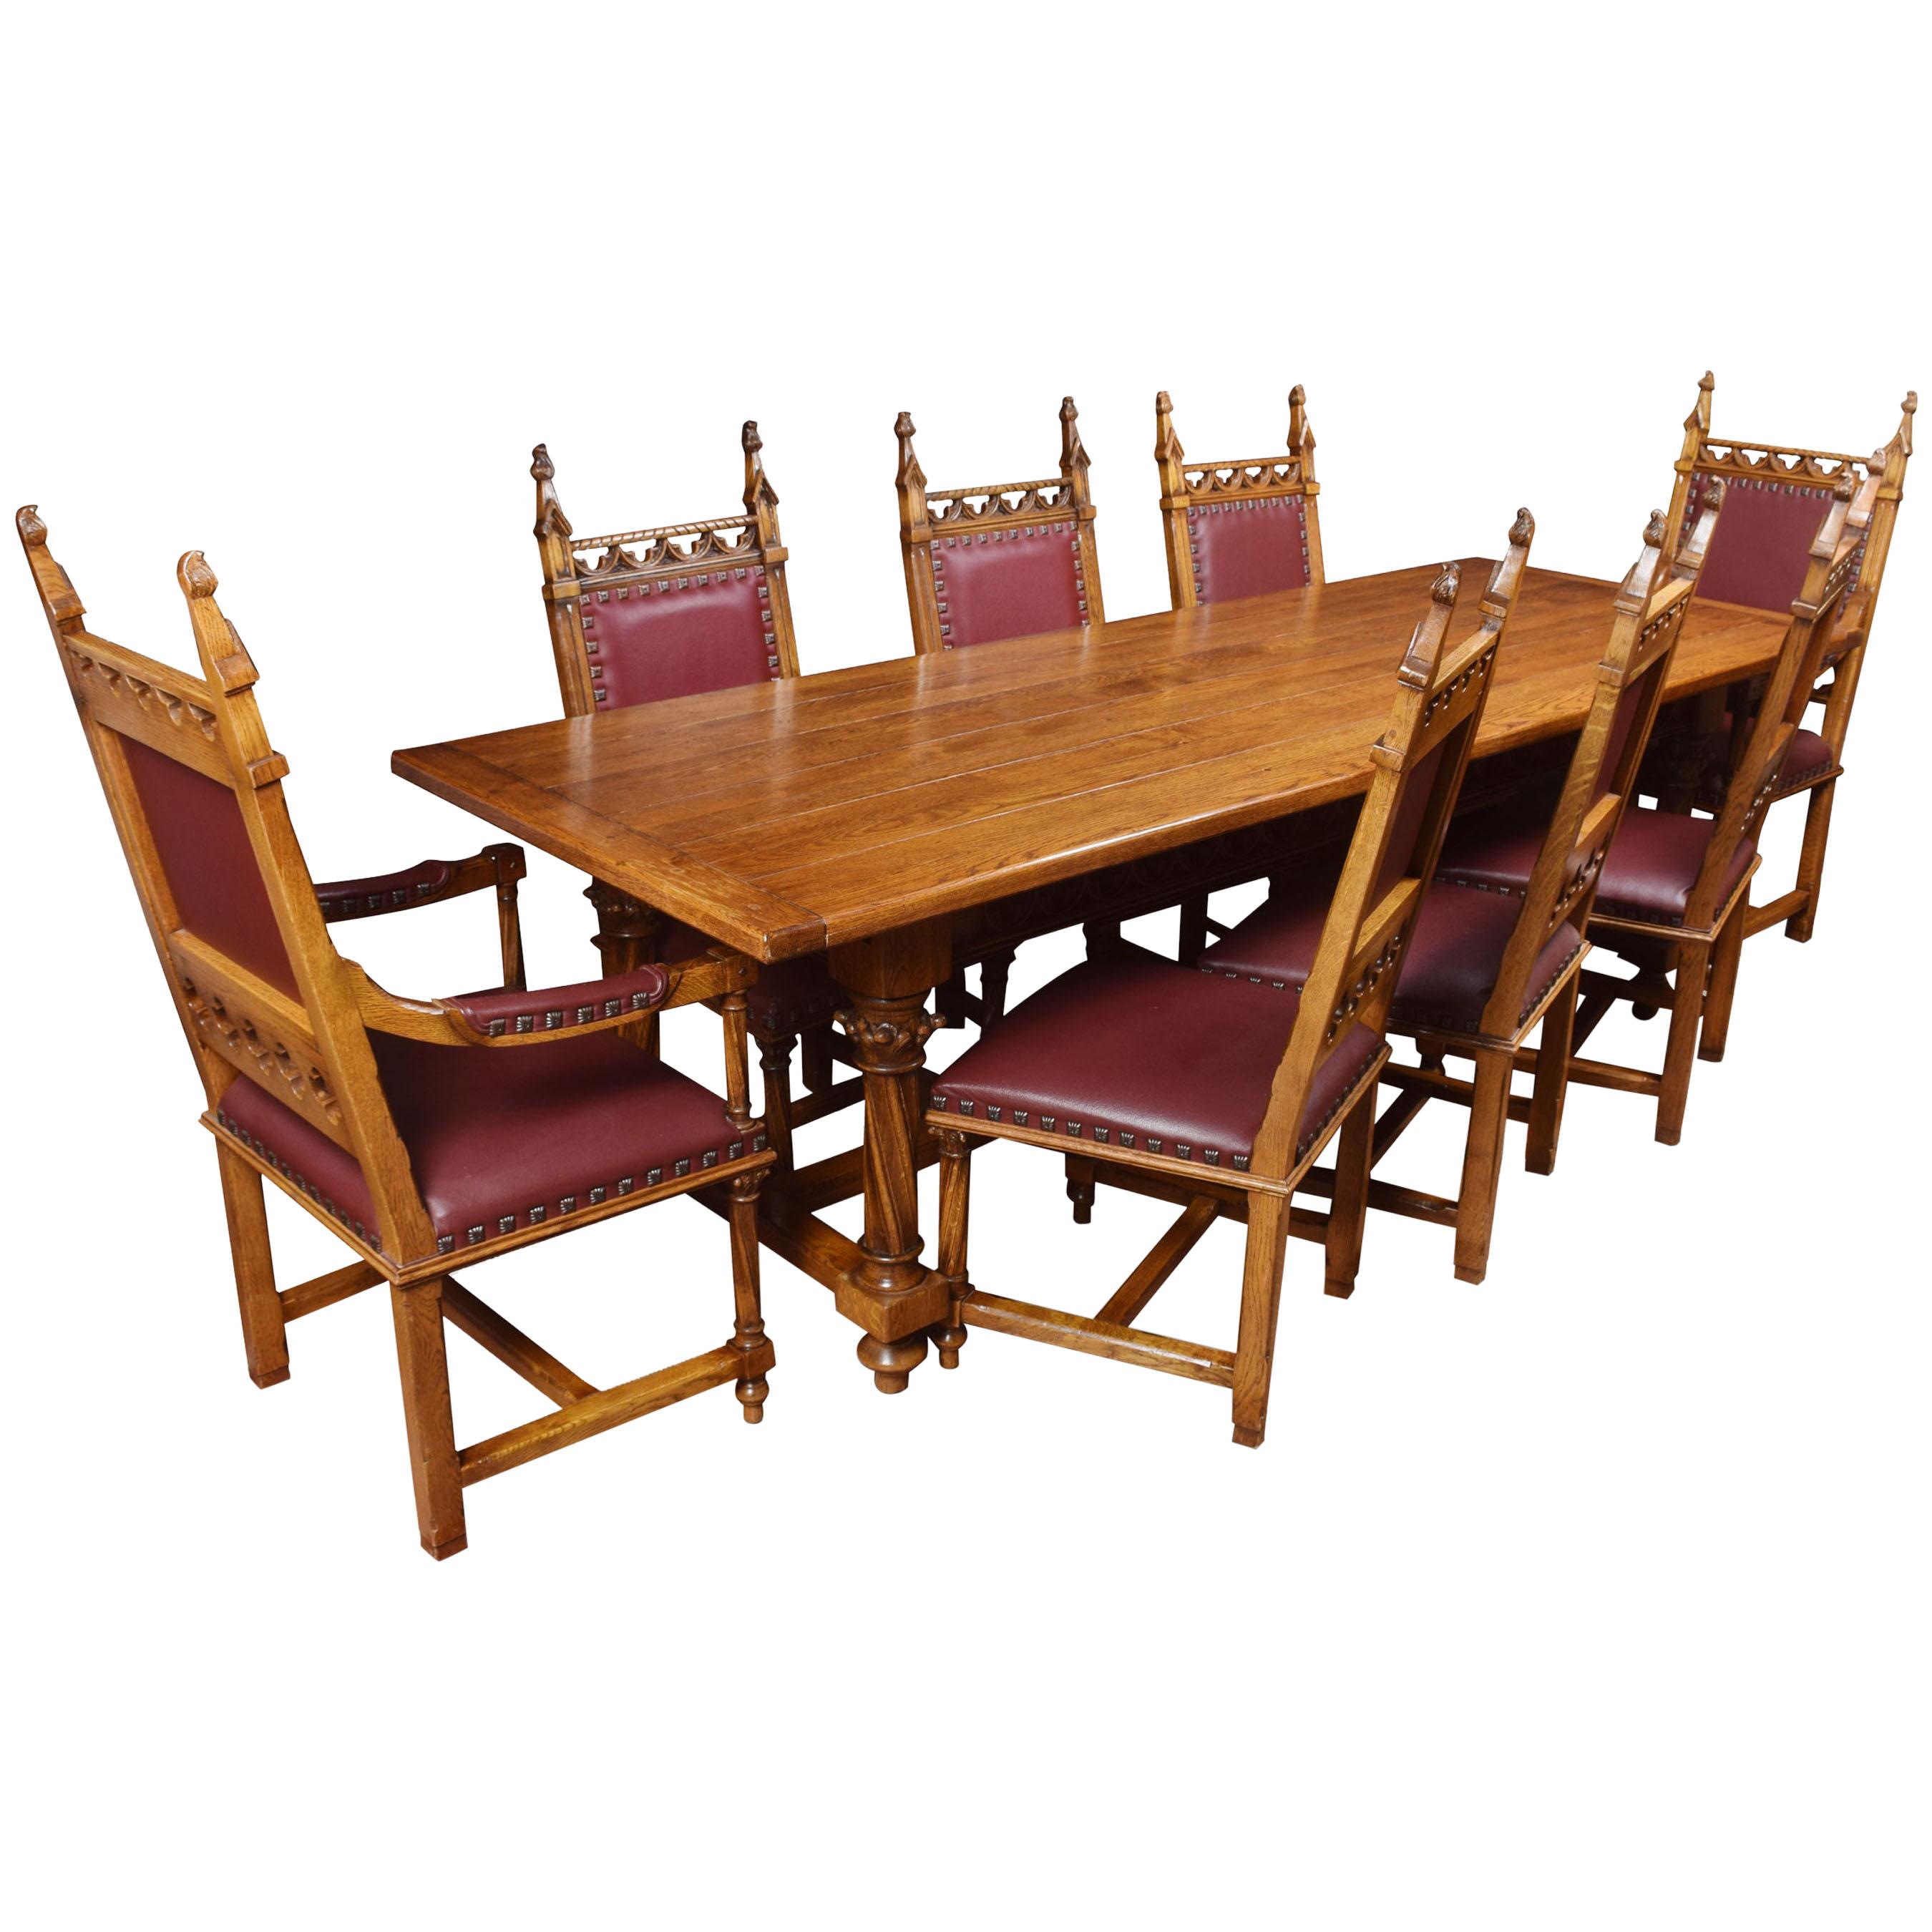 Gothic Design Oak Refectory Table and Eight Chairs